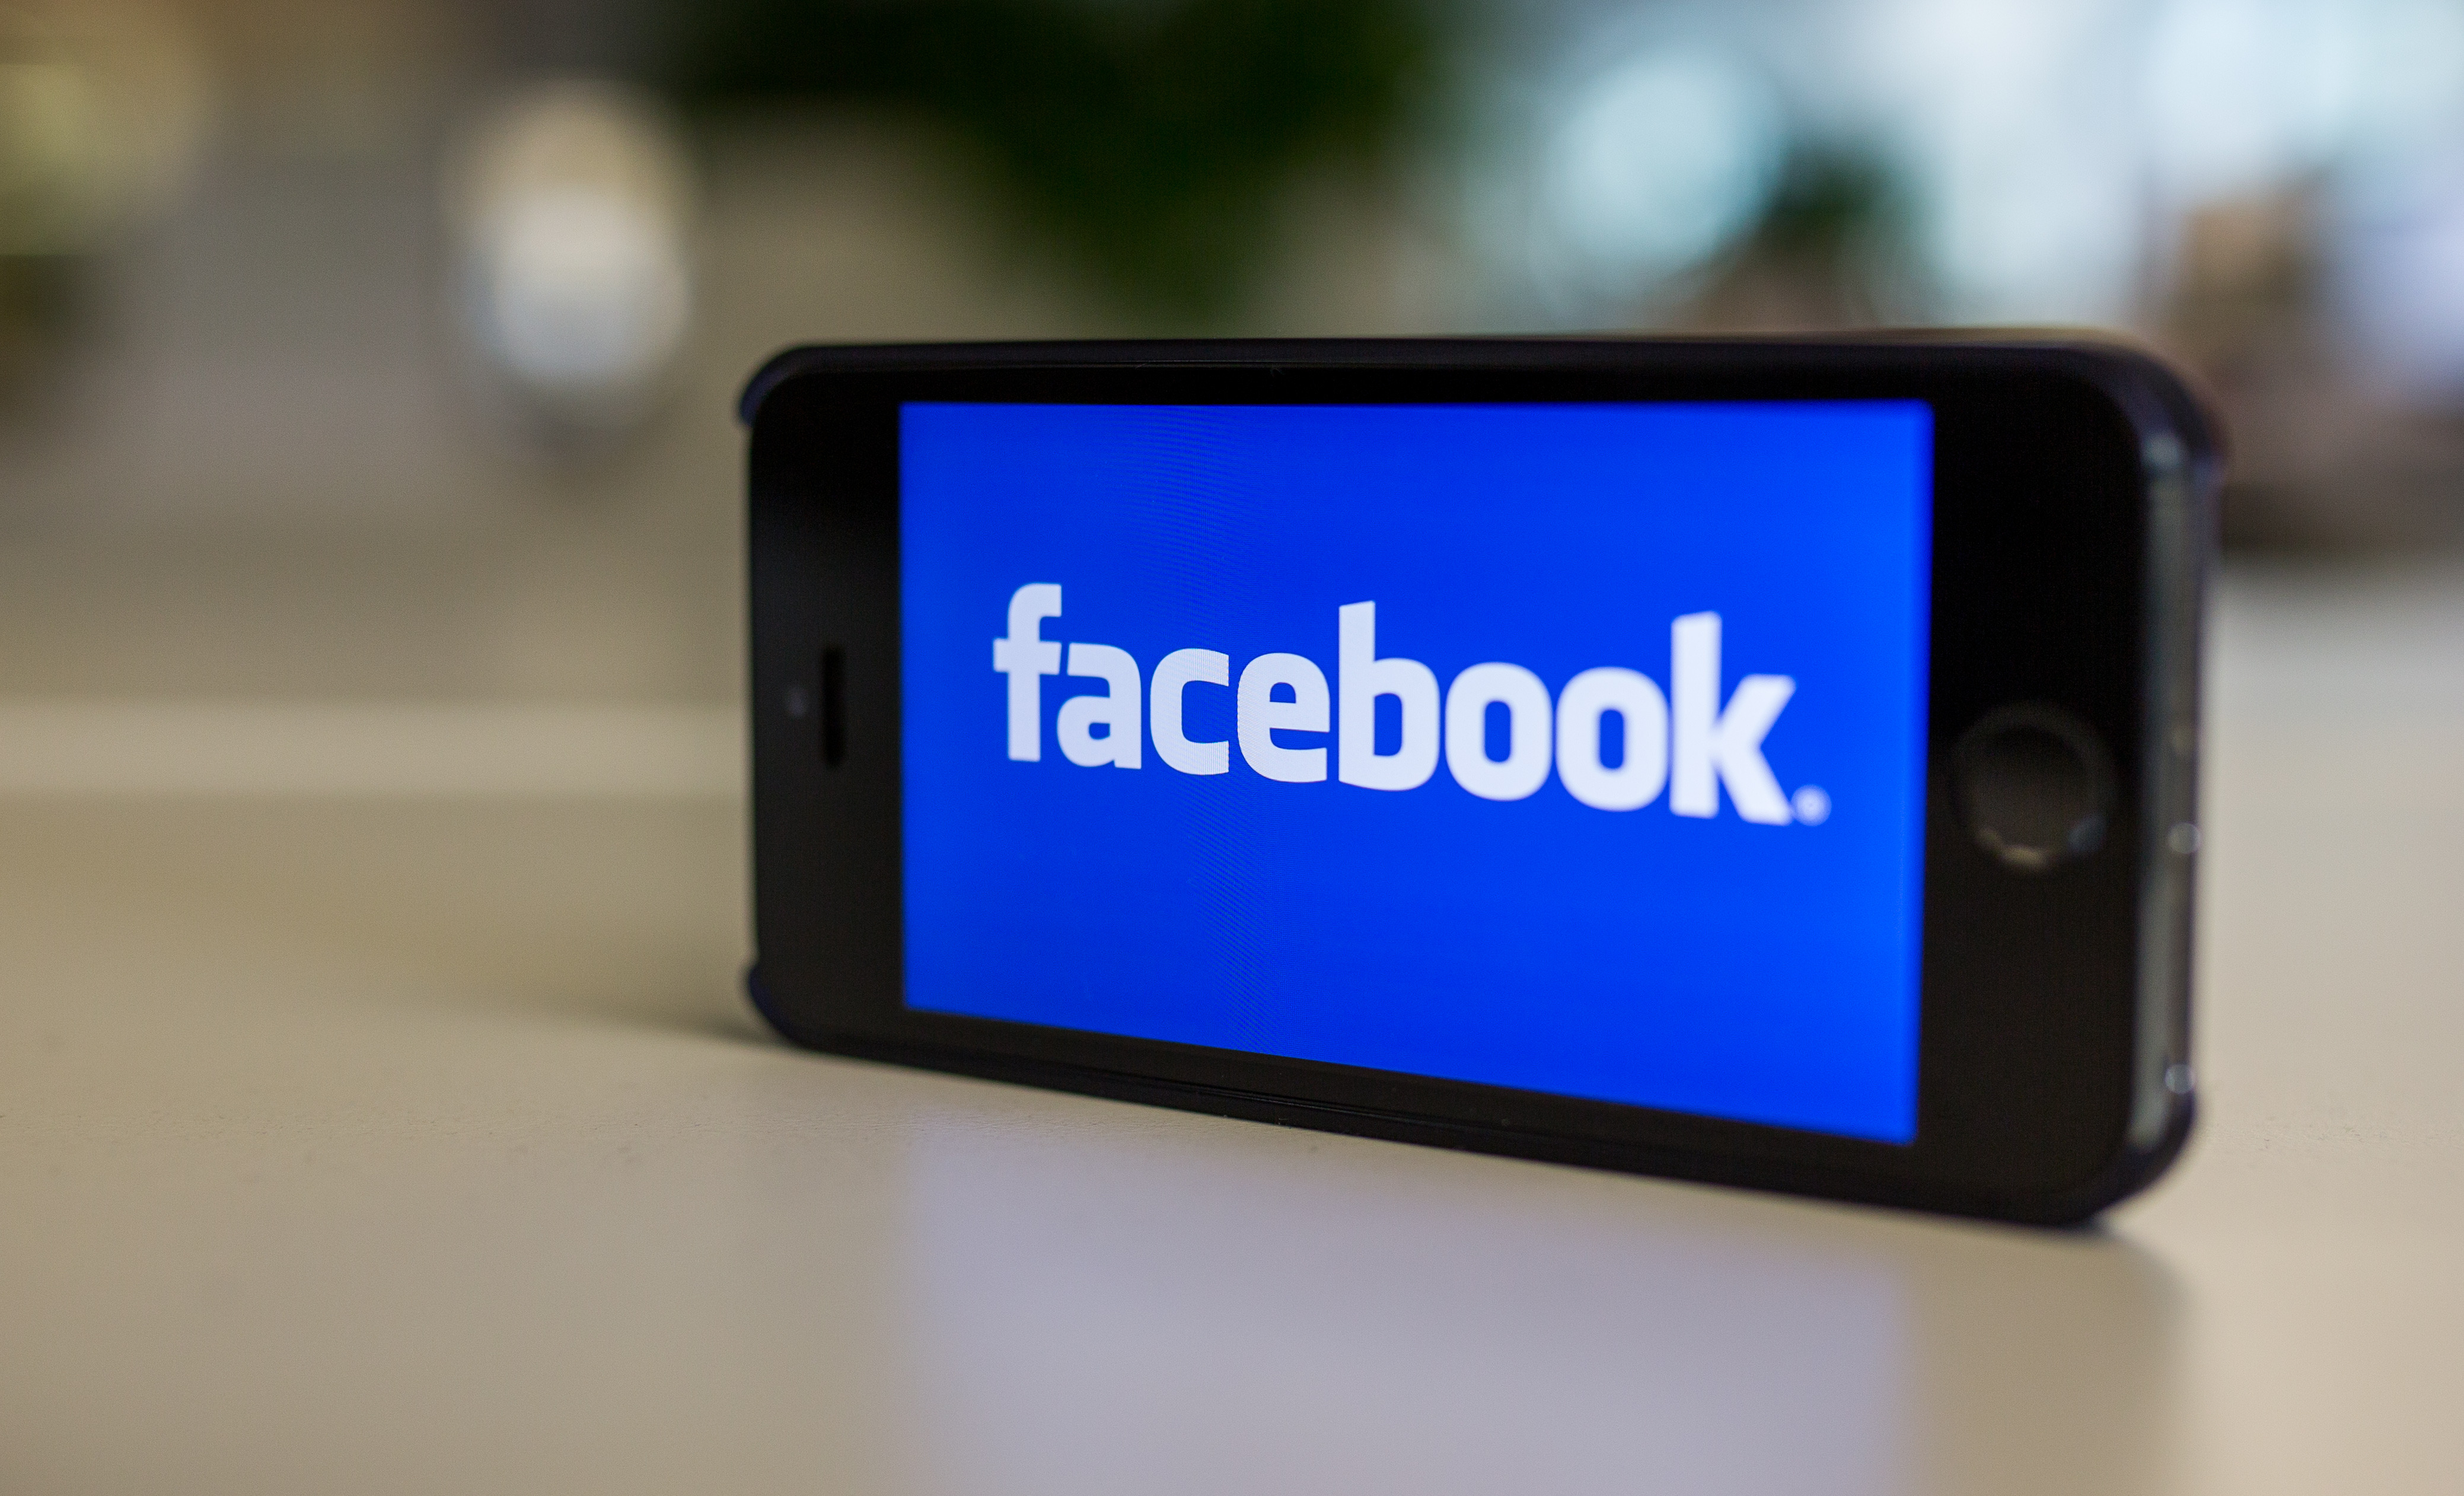 Facebook's logo is pictured on a phone in Berlin, Germany on Oct. 31 2014. (Lukas Schulze—AP)